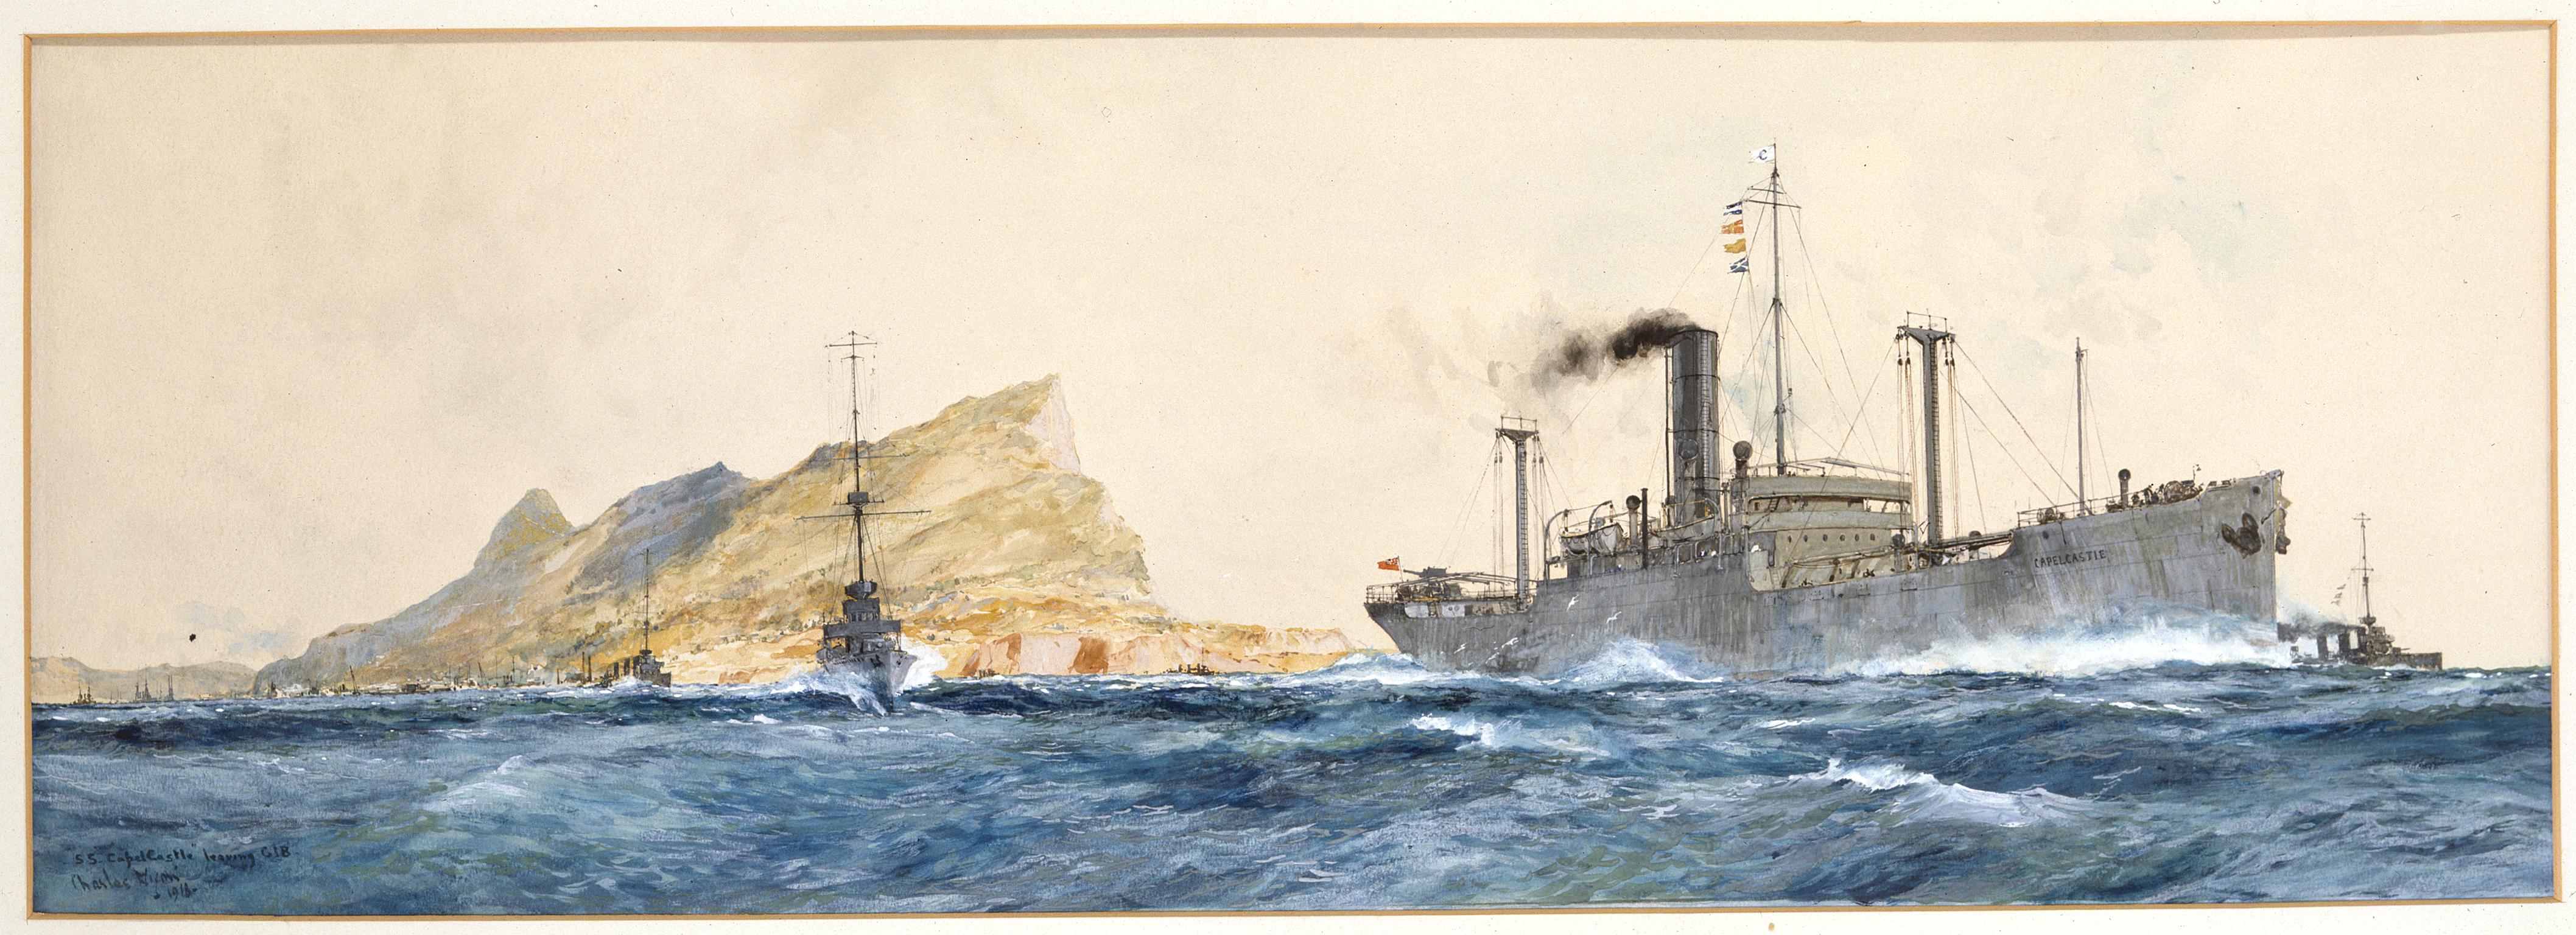 S.S. CAPELCASTLE leaving Gibralta (painting)